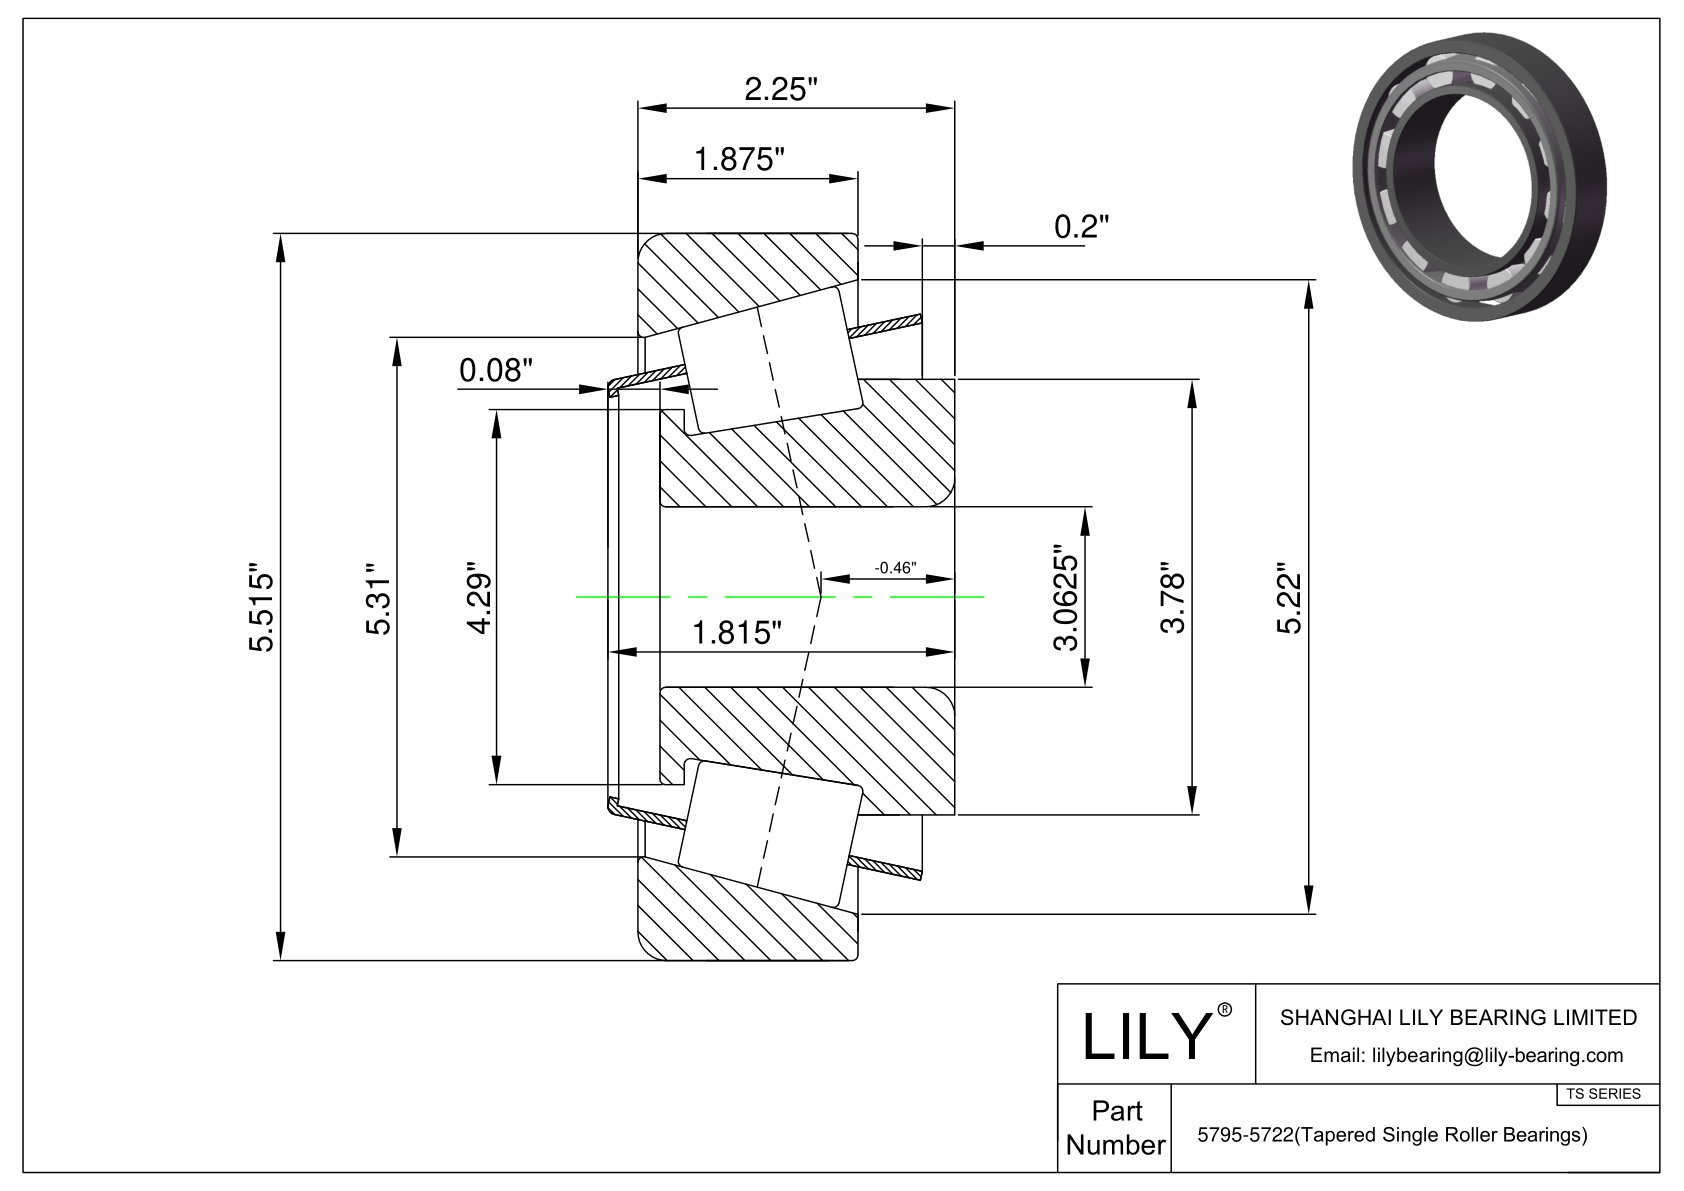 5795-5722 TS (Tapered Single Roller Bearings) (Imperial) cad drawing